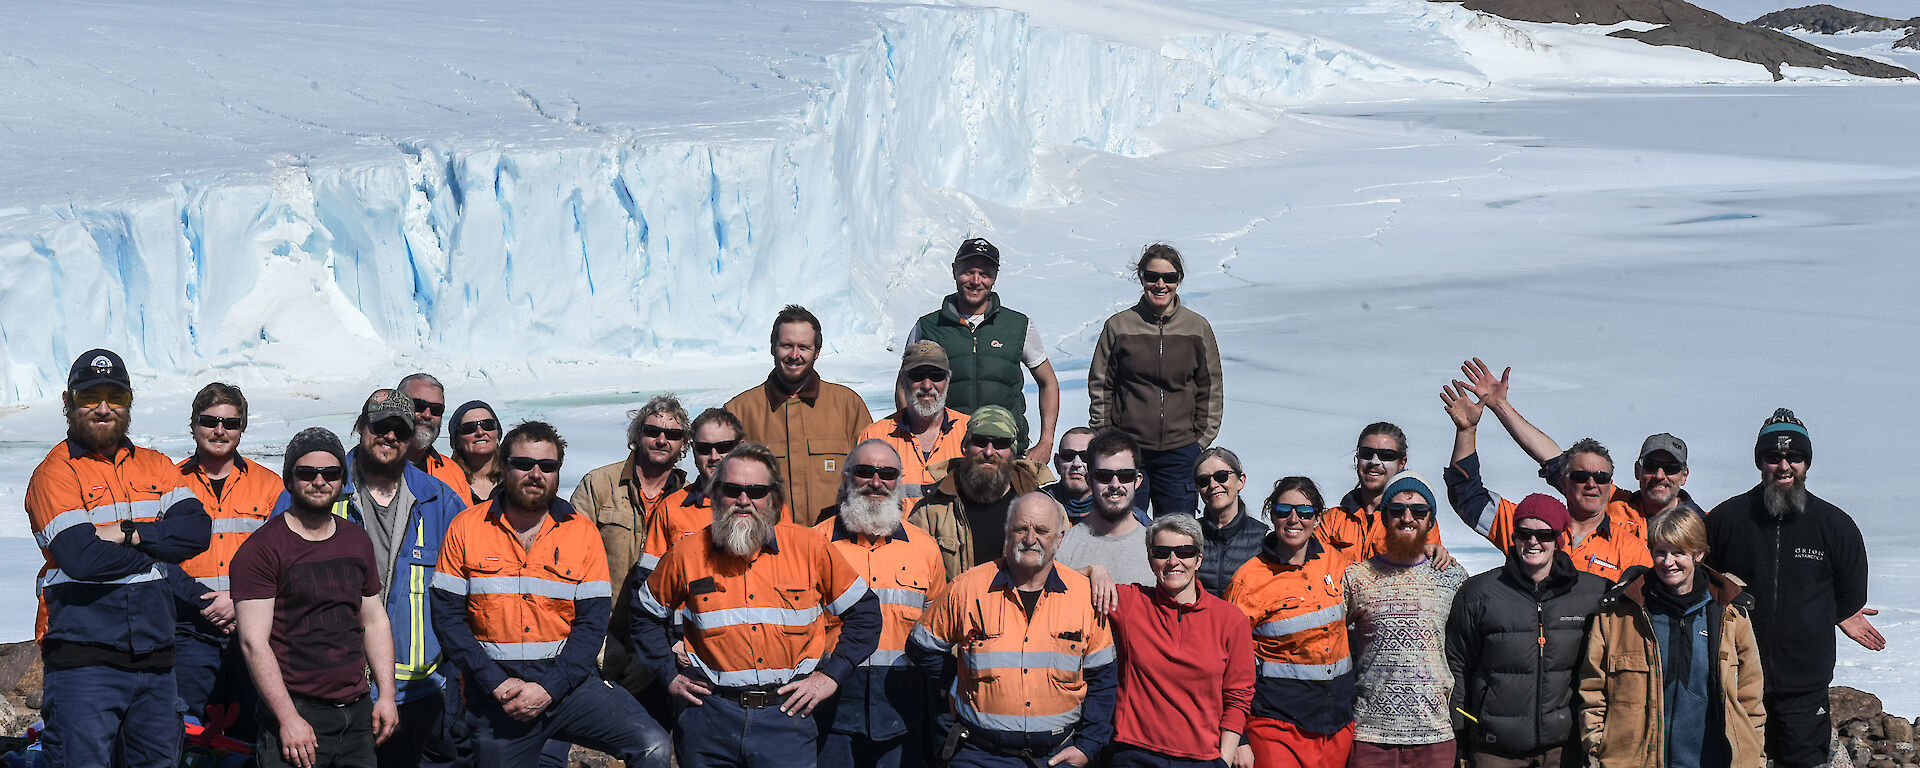 A group shot of the Mawson summer population